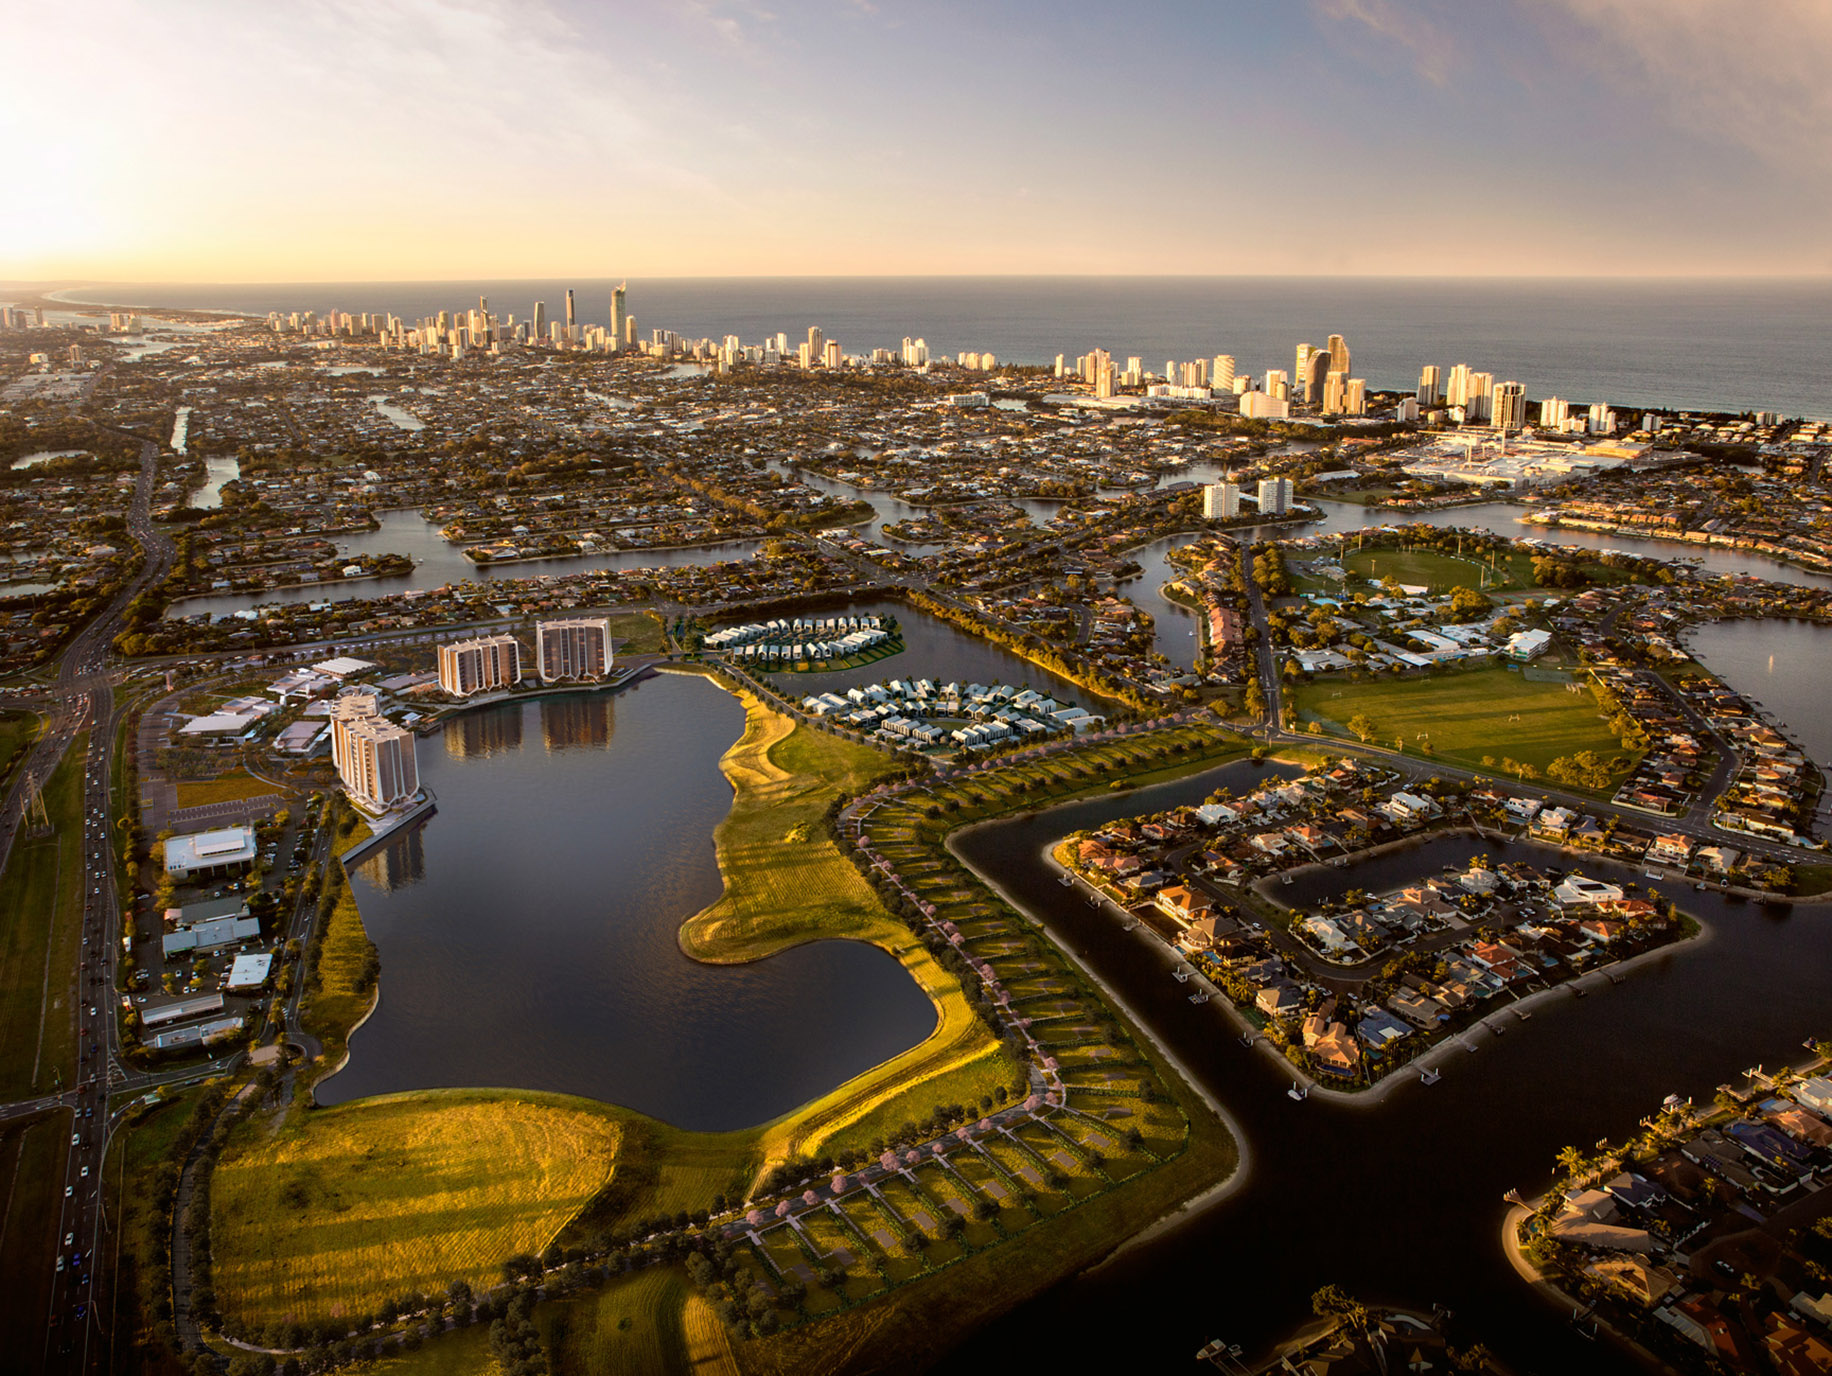 Kollosche Commercial has closed a $45,800,000 sale inside The Lakes masterplan development, paving the way for the Gold Coast’s first retail resort.